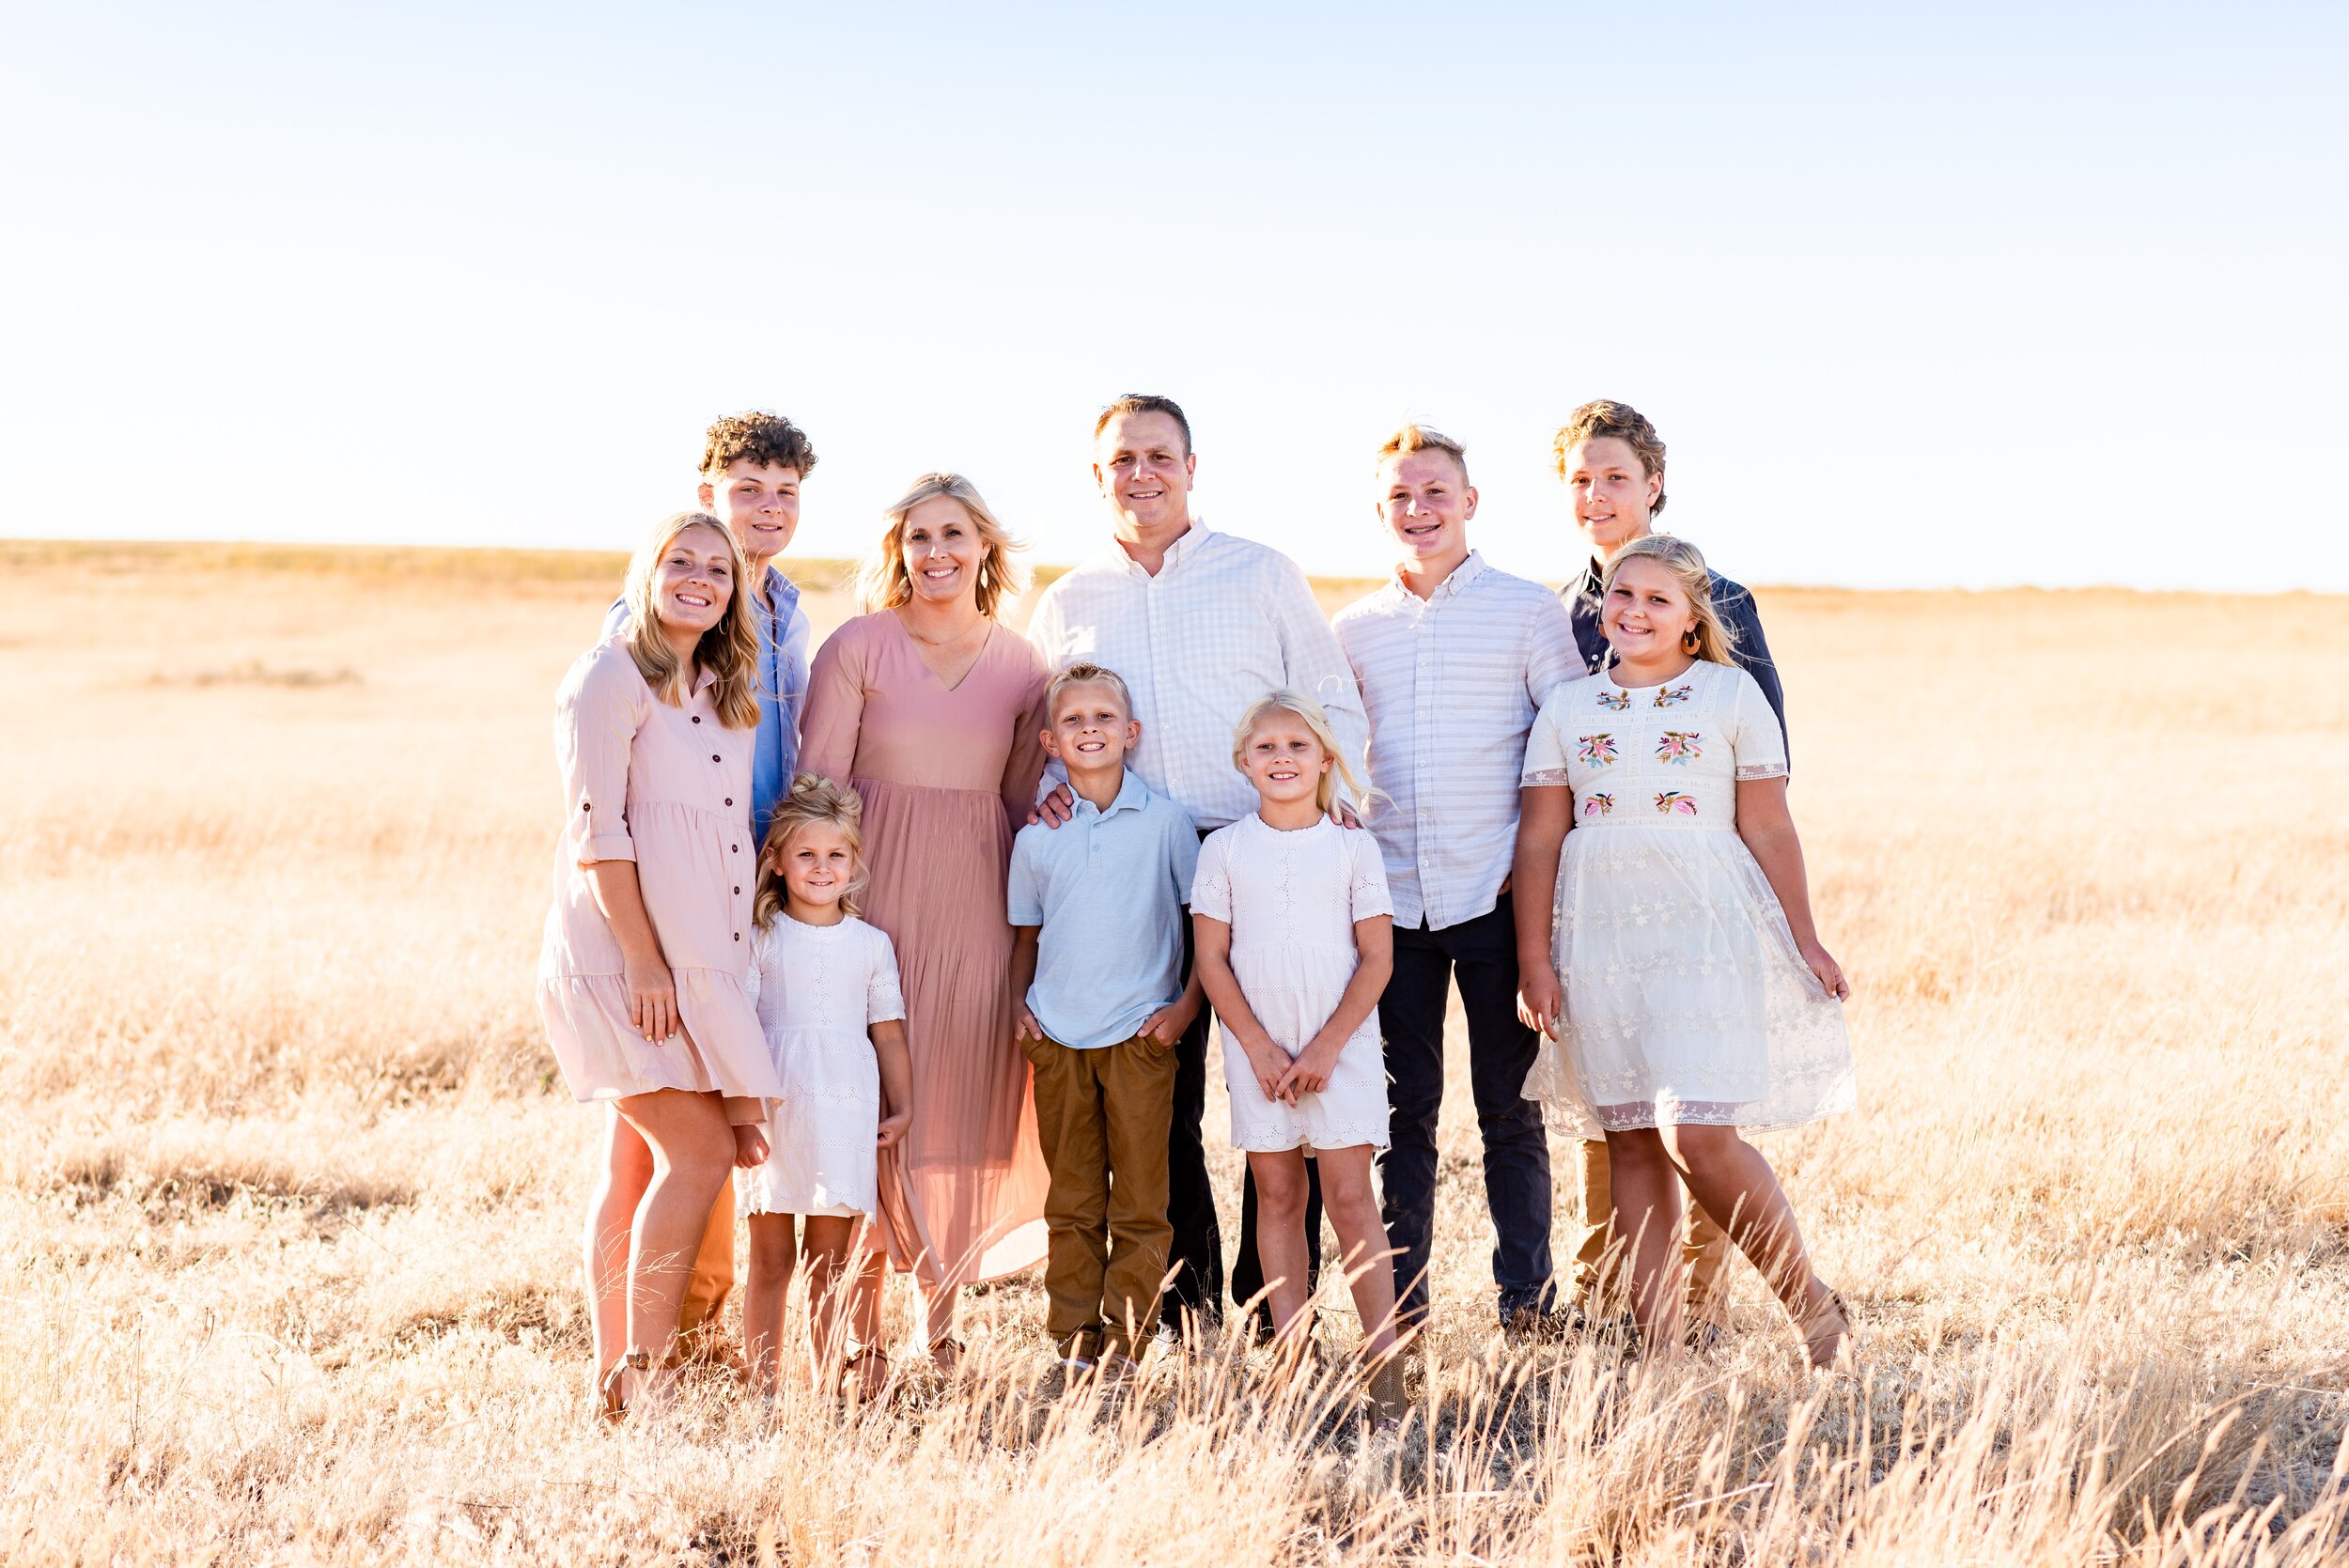 Royal City Large Family Orchard Session - Family of 10 Pose - What to Wear to Family Photos - Royal City Family Photographer - Tri Cities Family Photographer - Morgan Tayler Photo &amp; Design